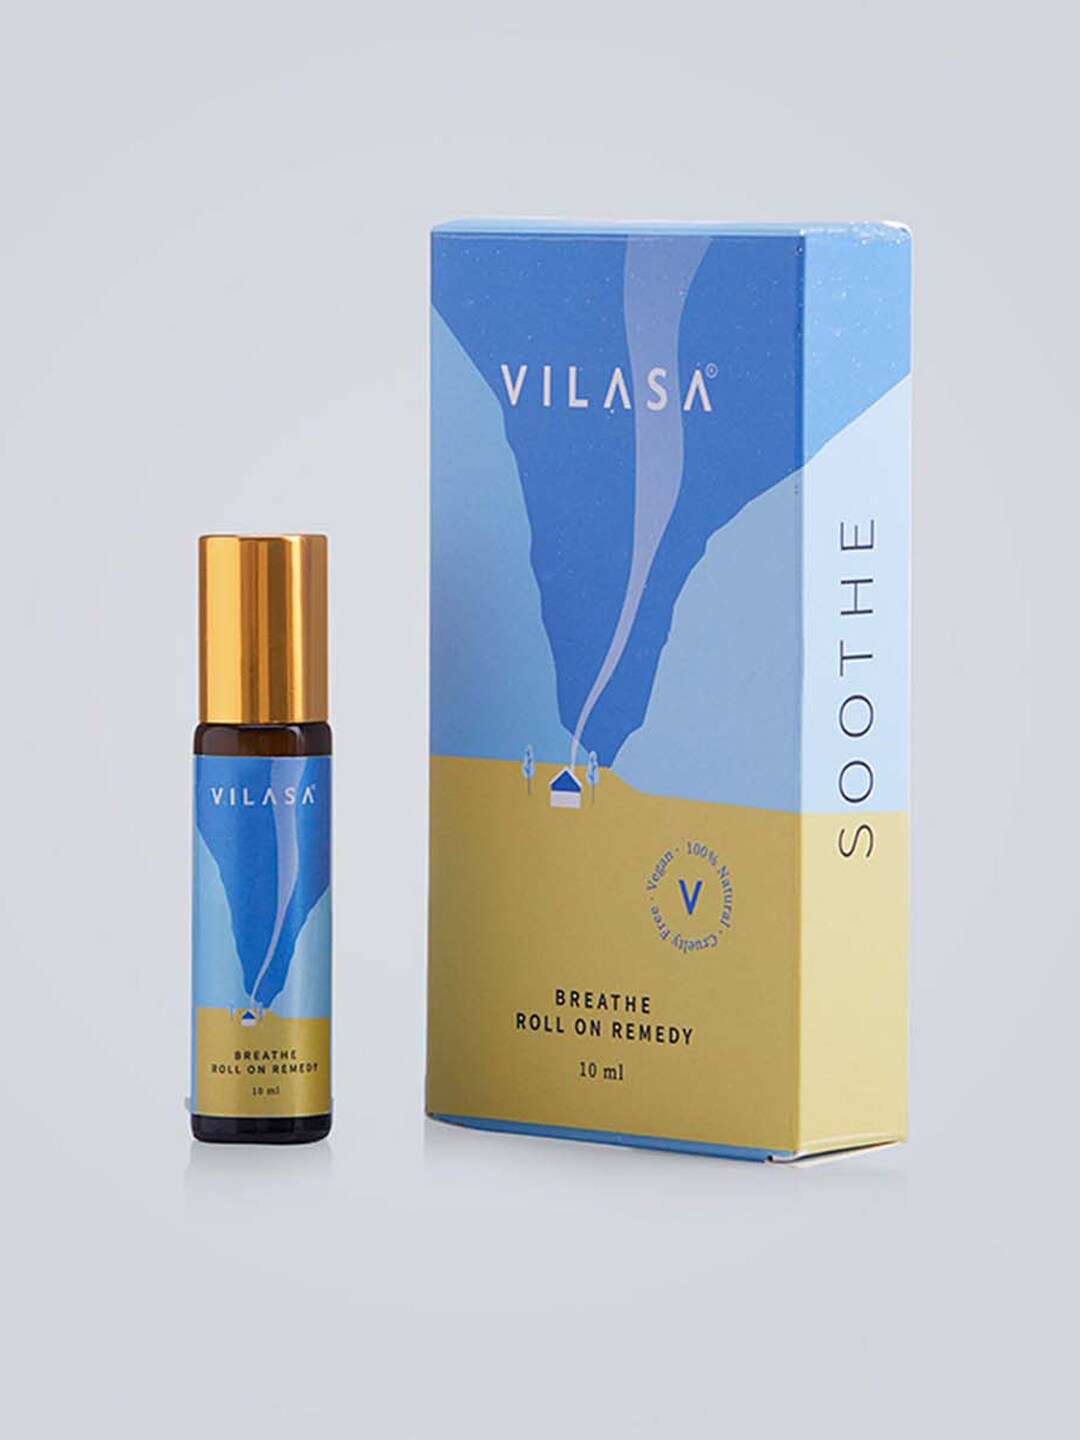 VILASA Soothe Breathe Roll On Remedy Body Mist - 10 ml Price in India